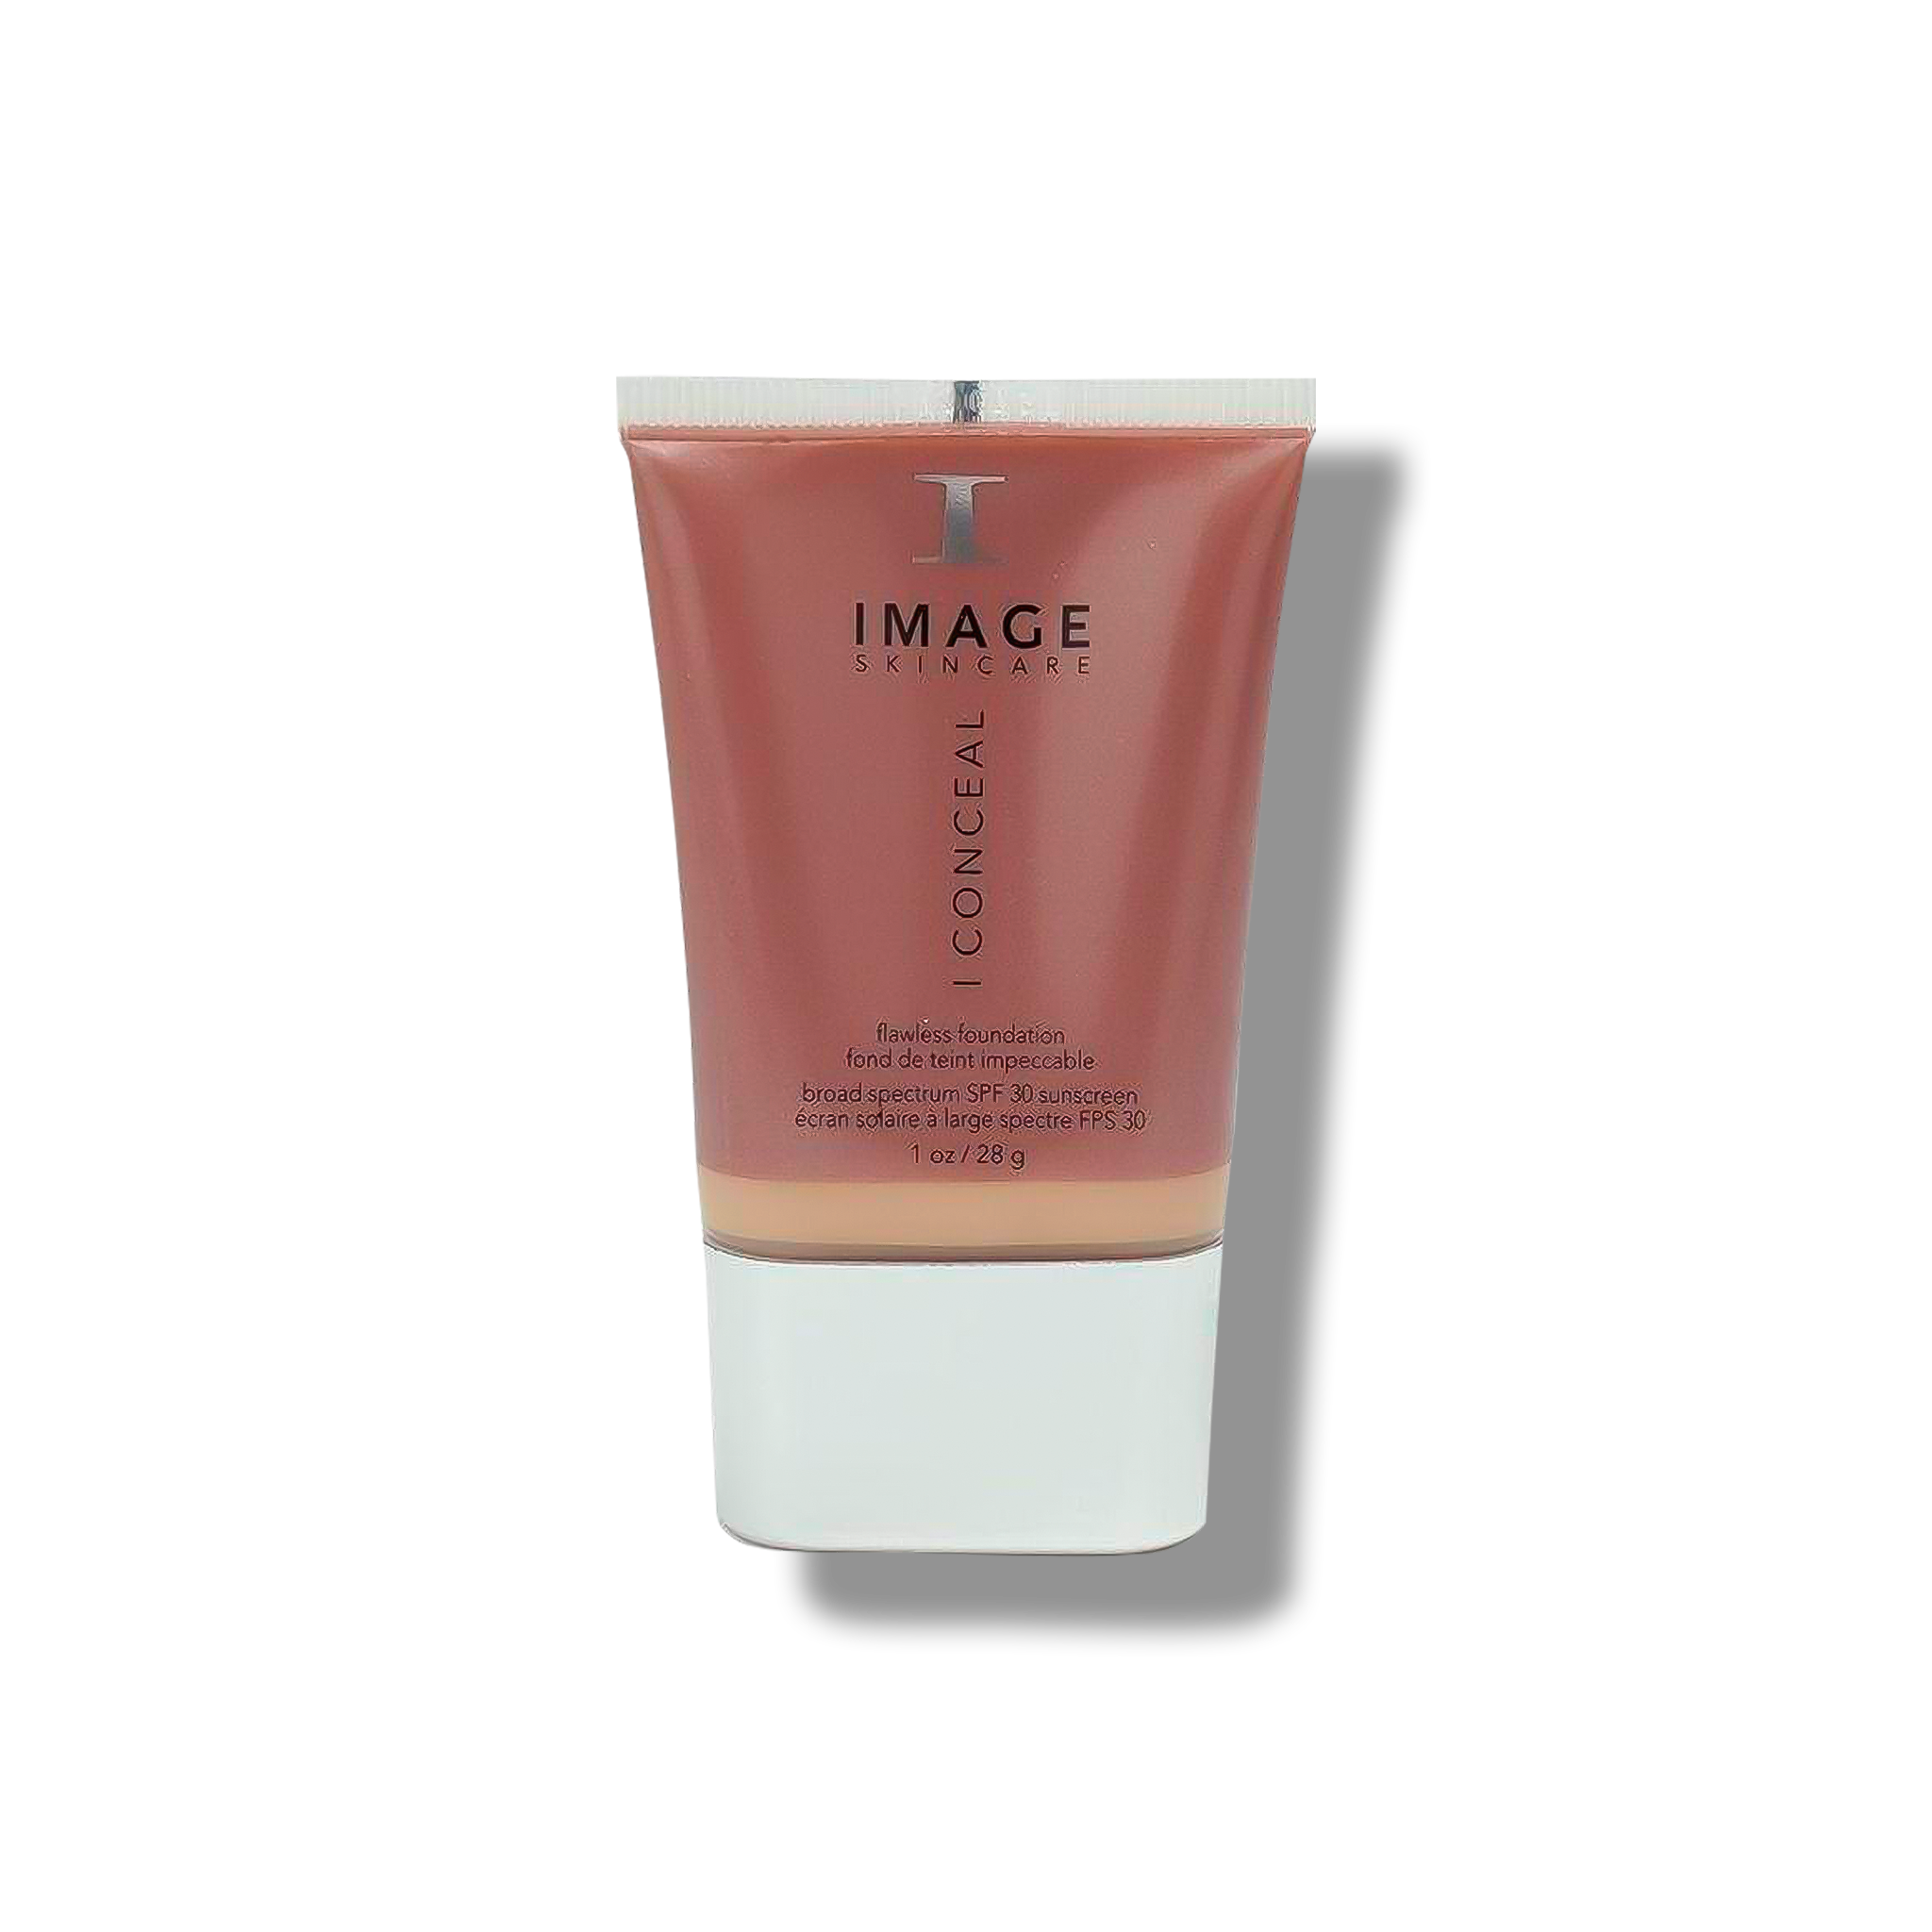 Image Skincare I CONCEAL Flawless Foundation Broad-spectrum SPF 30 Sunscreen